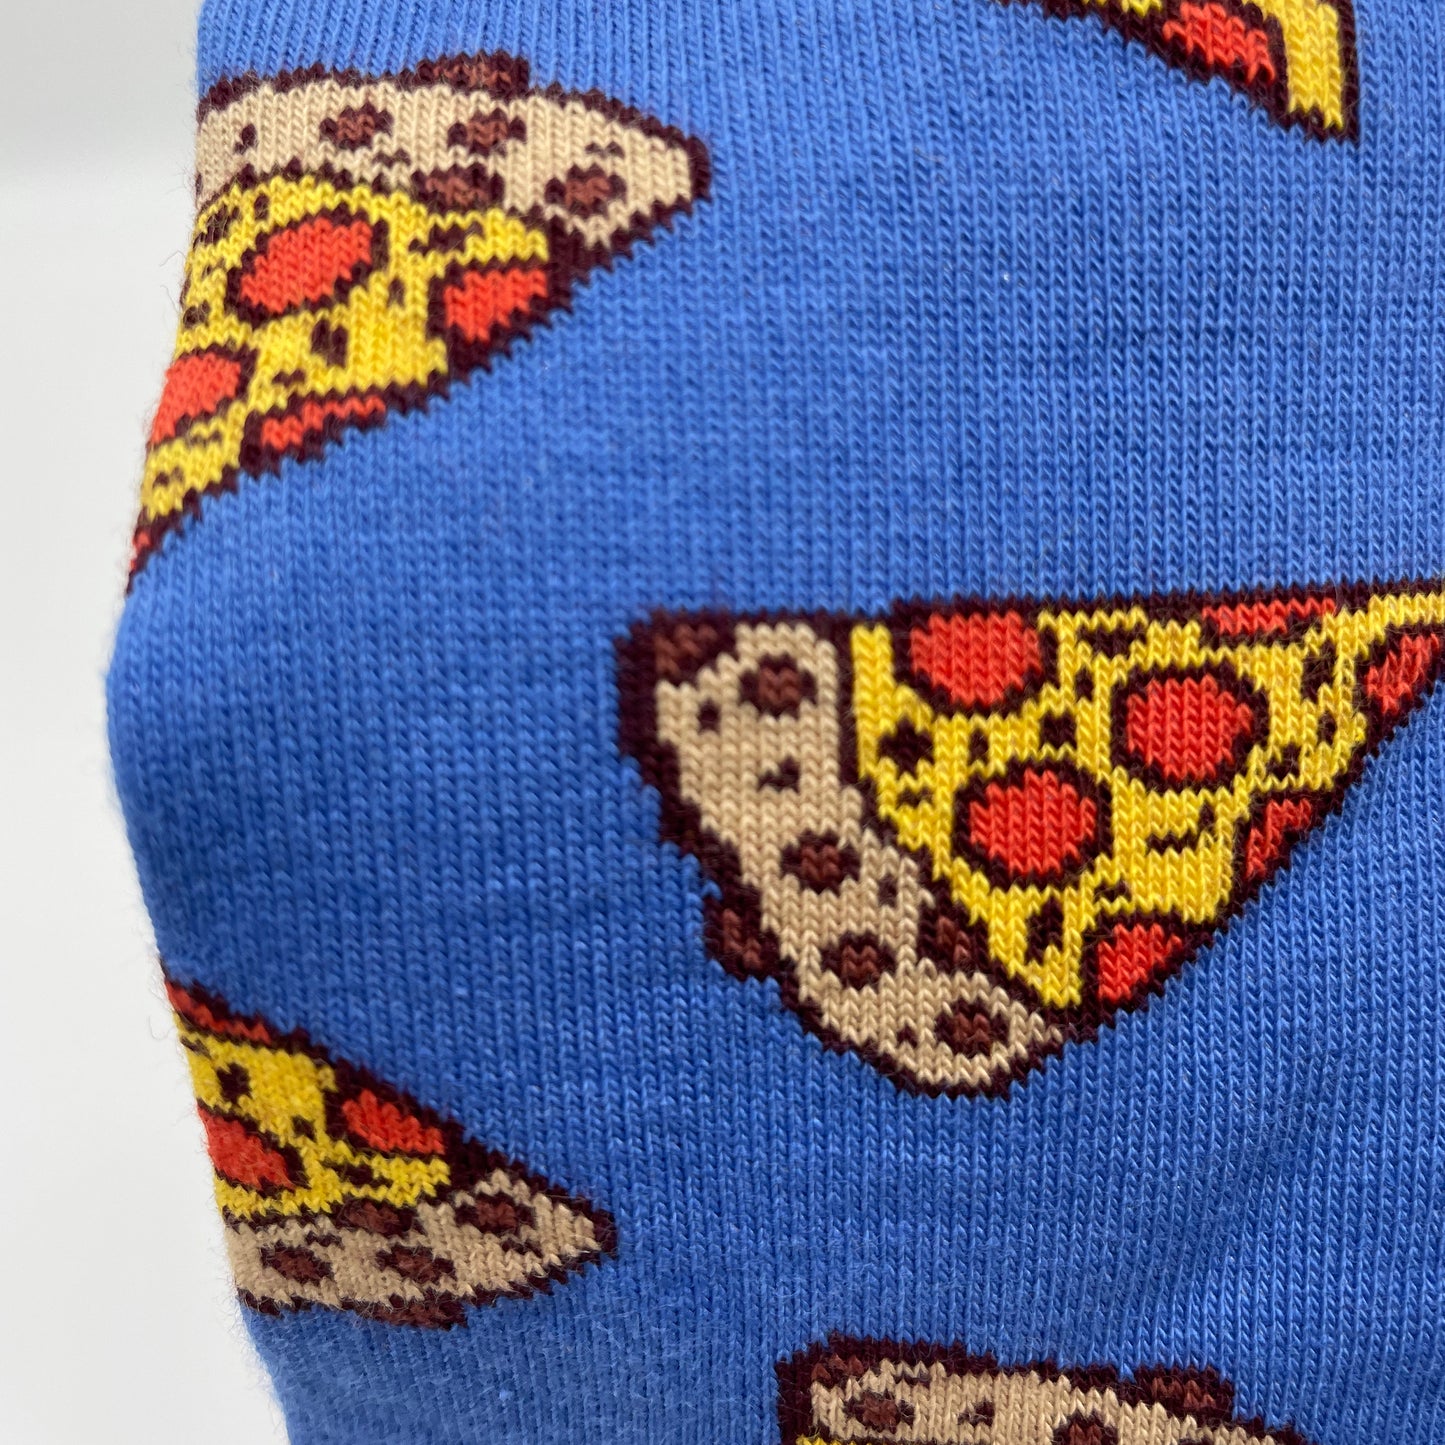 A close-up photo shows detail of a pepperoni pizza pattern woven into blue organic cotton socks.